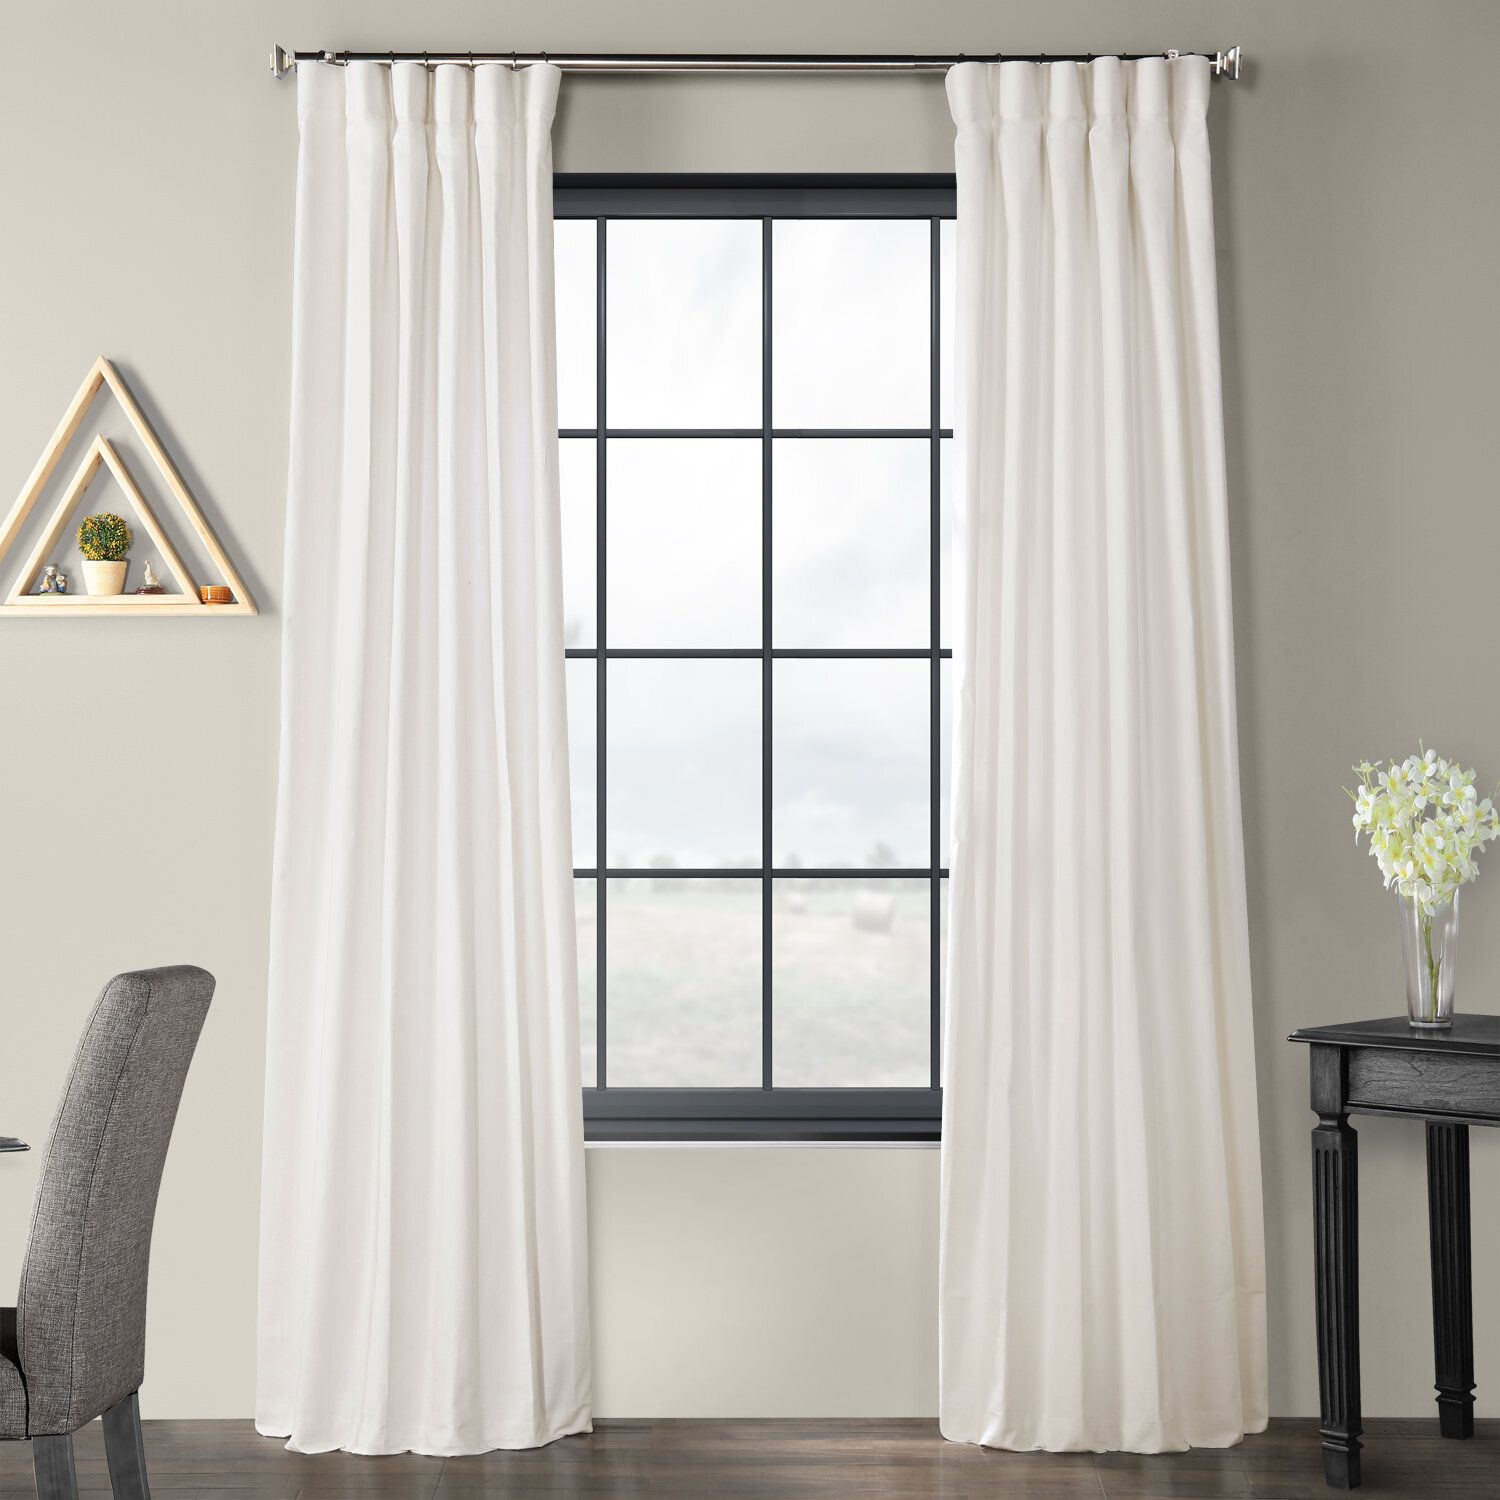 Sanger Solid Country Cotton Linen Weave Rod Pocket Single Curtain Panel Regarding Solid Country Cotton Linen Weave Curtain Panels (View 3 of 30)